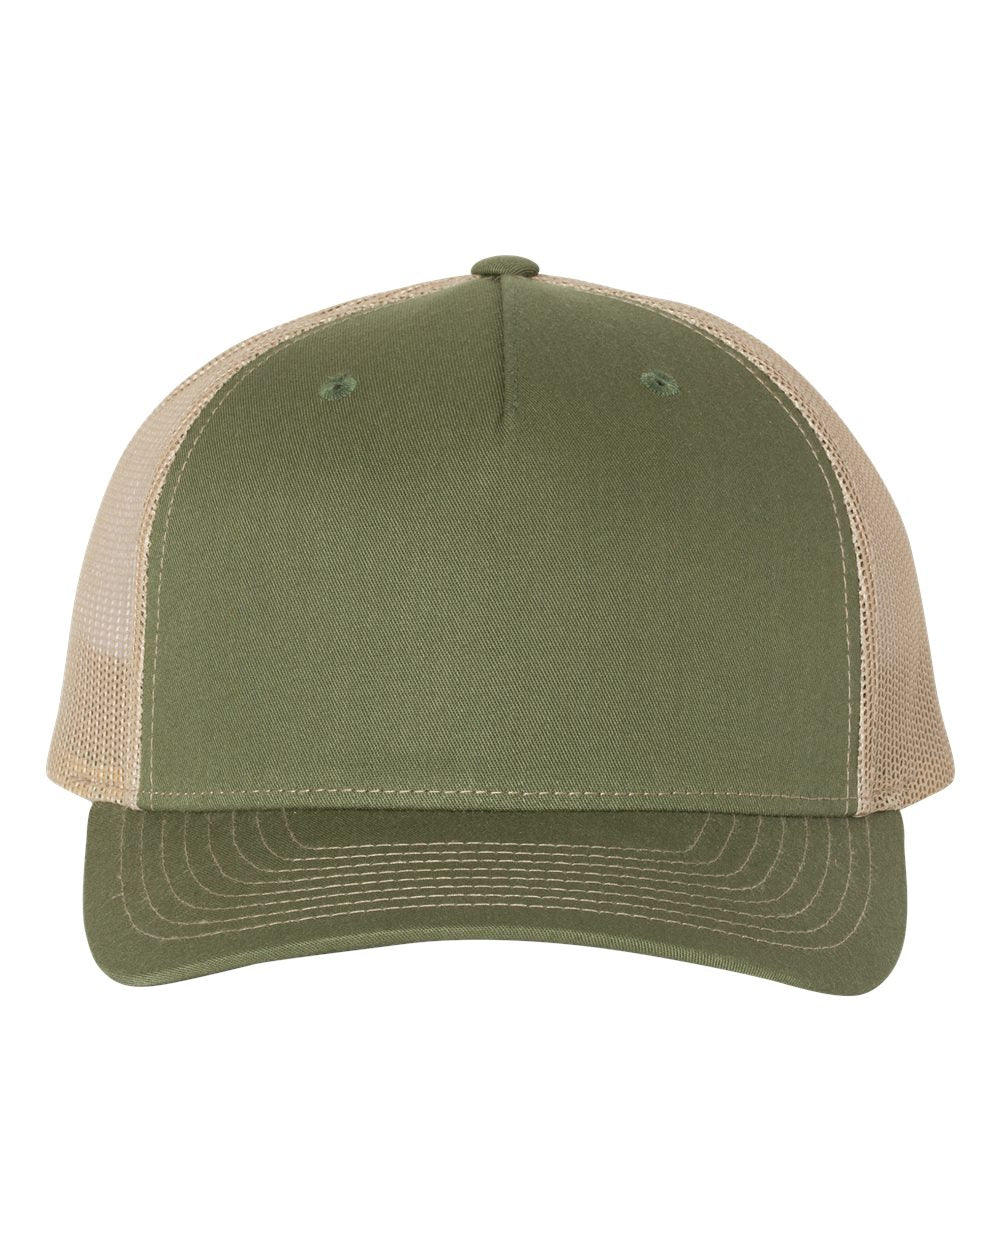 Richardson Five-Panel Trucker Cap 112FP #color_Army Olive Green/ Tan